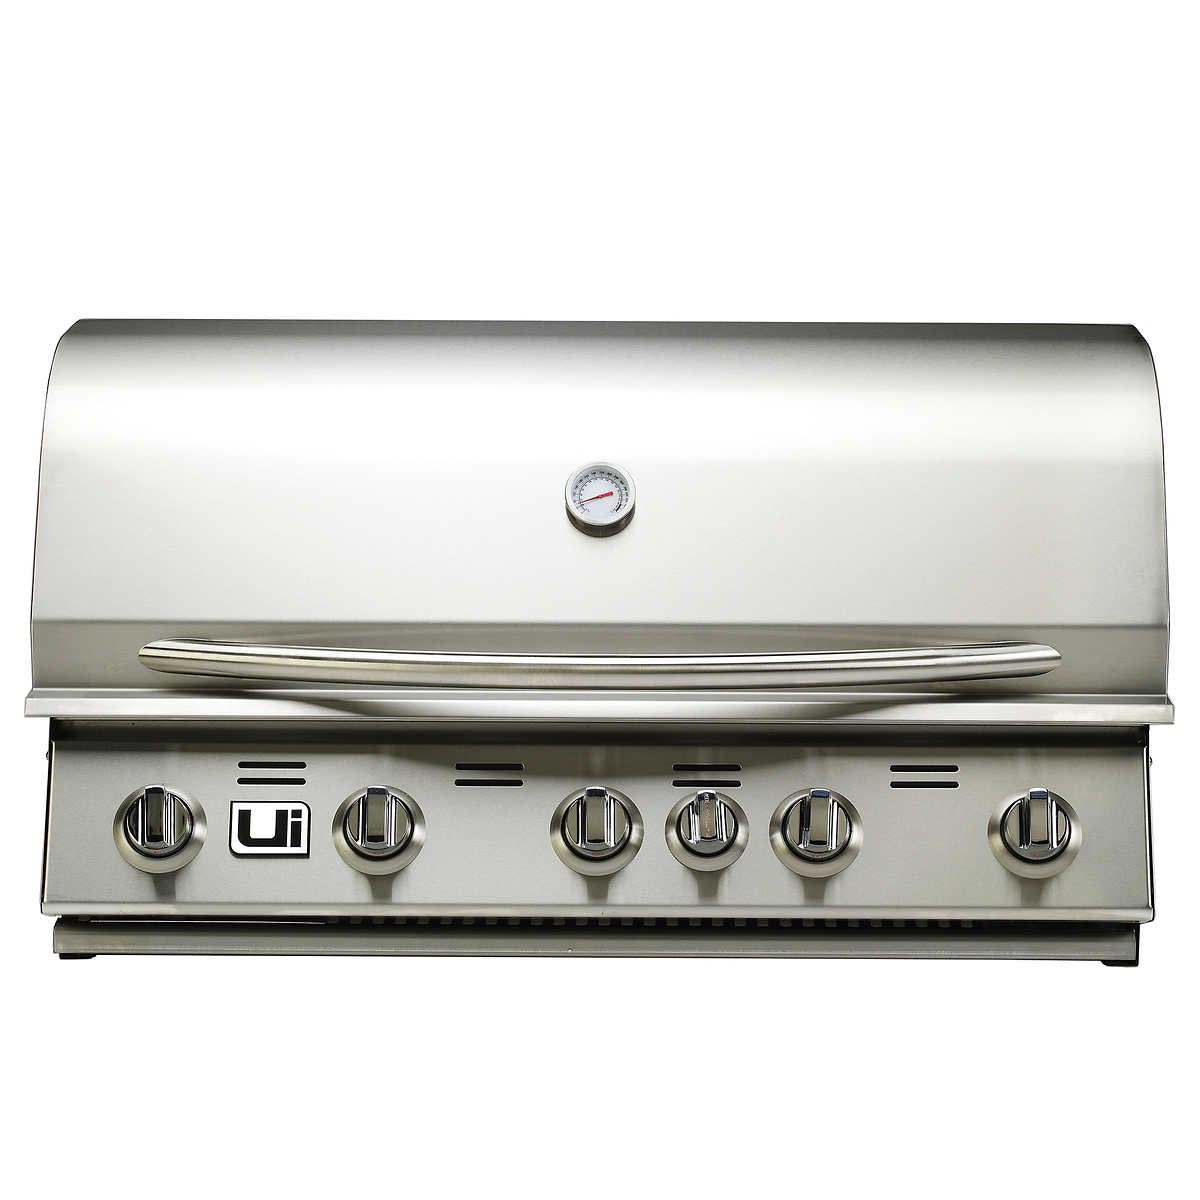 KitchenAid Eight Burner Outdoor Gas Grill User Manual